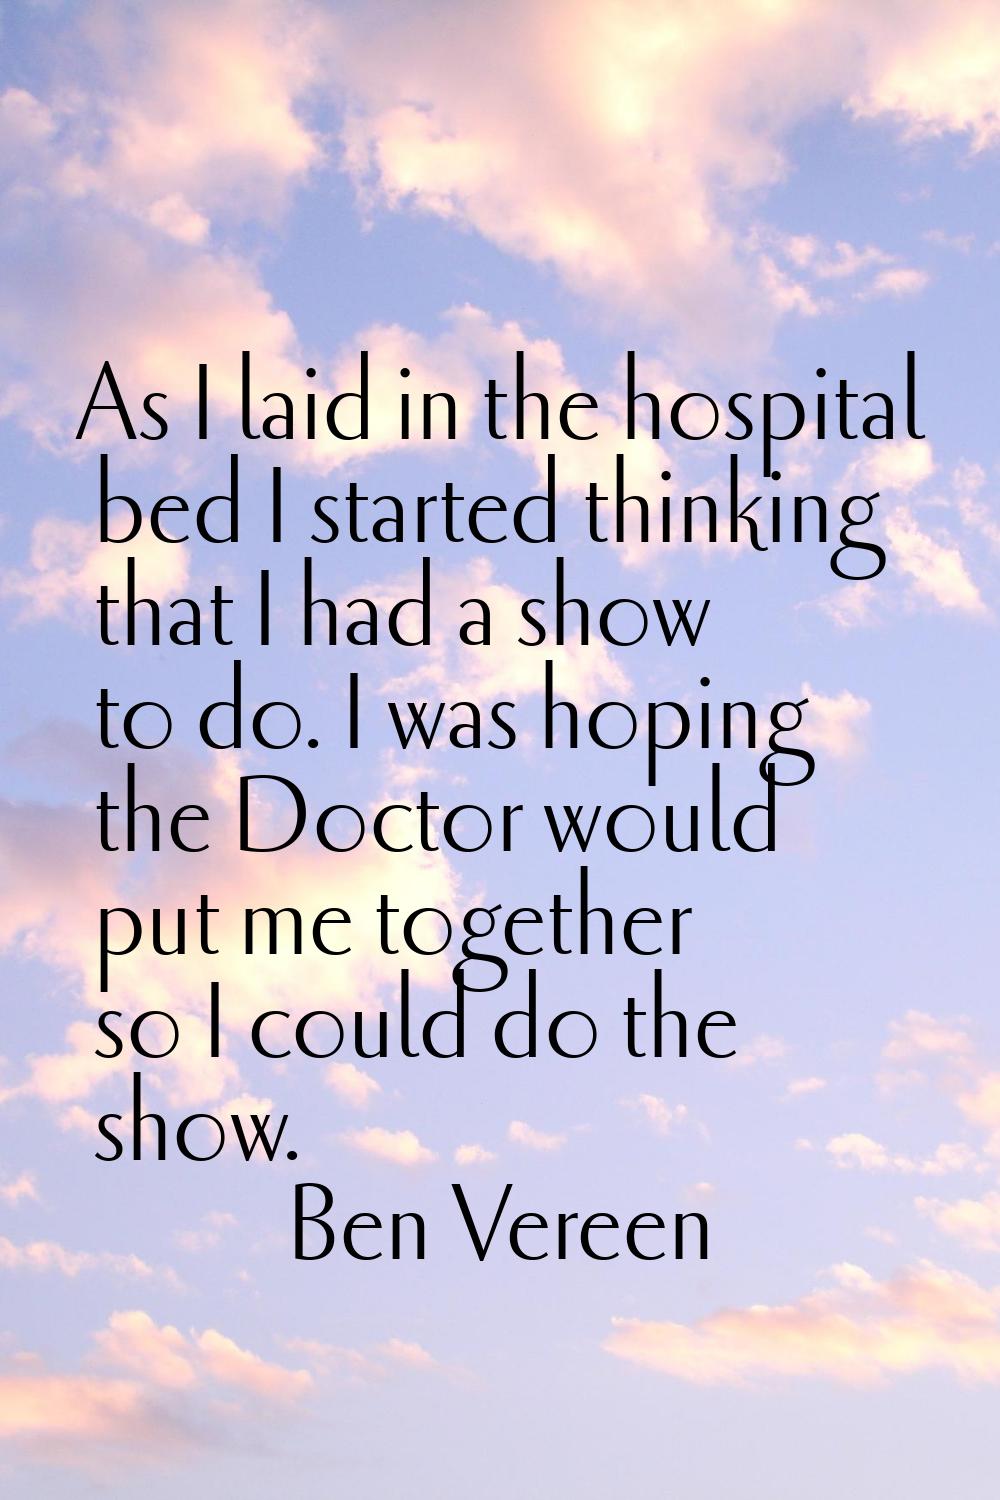 As I laid in the hospital bed I started thinking that I had a show to do. I was hoping the Doctor w